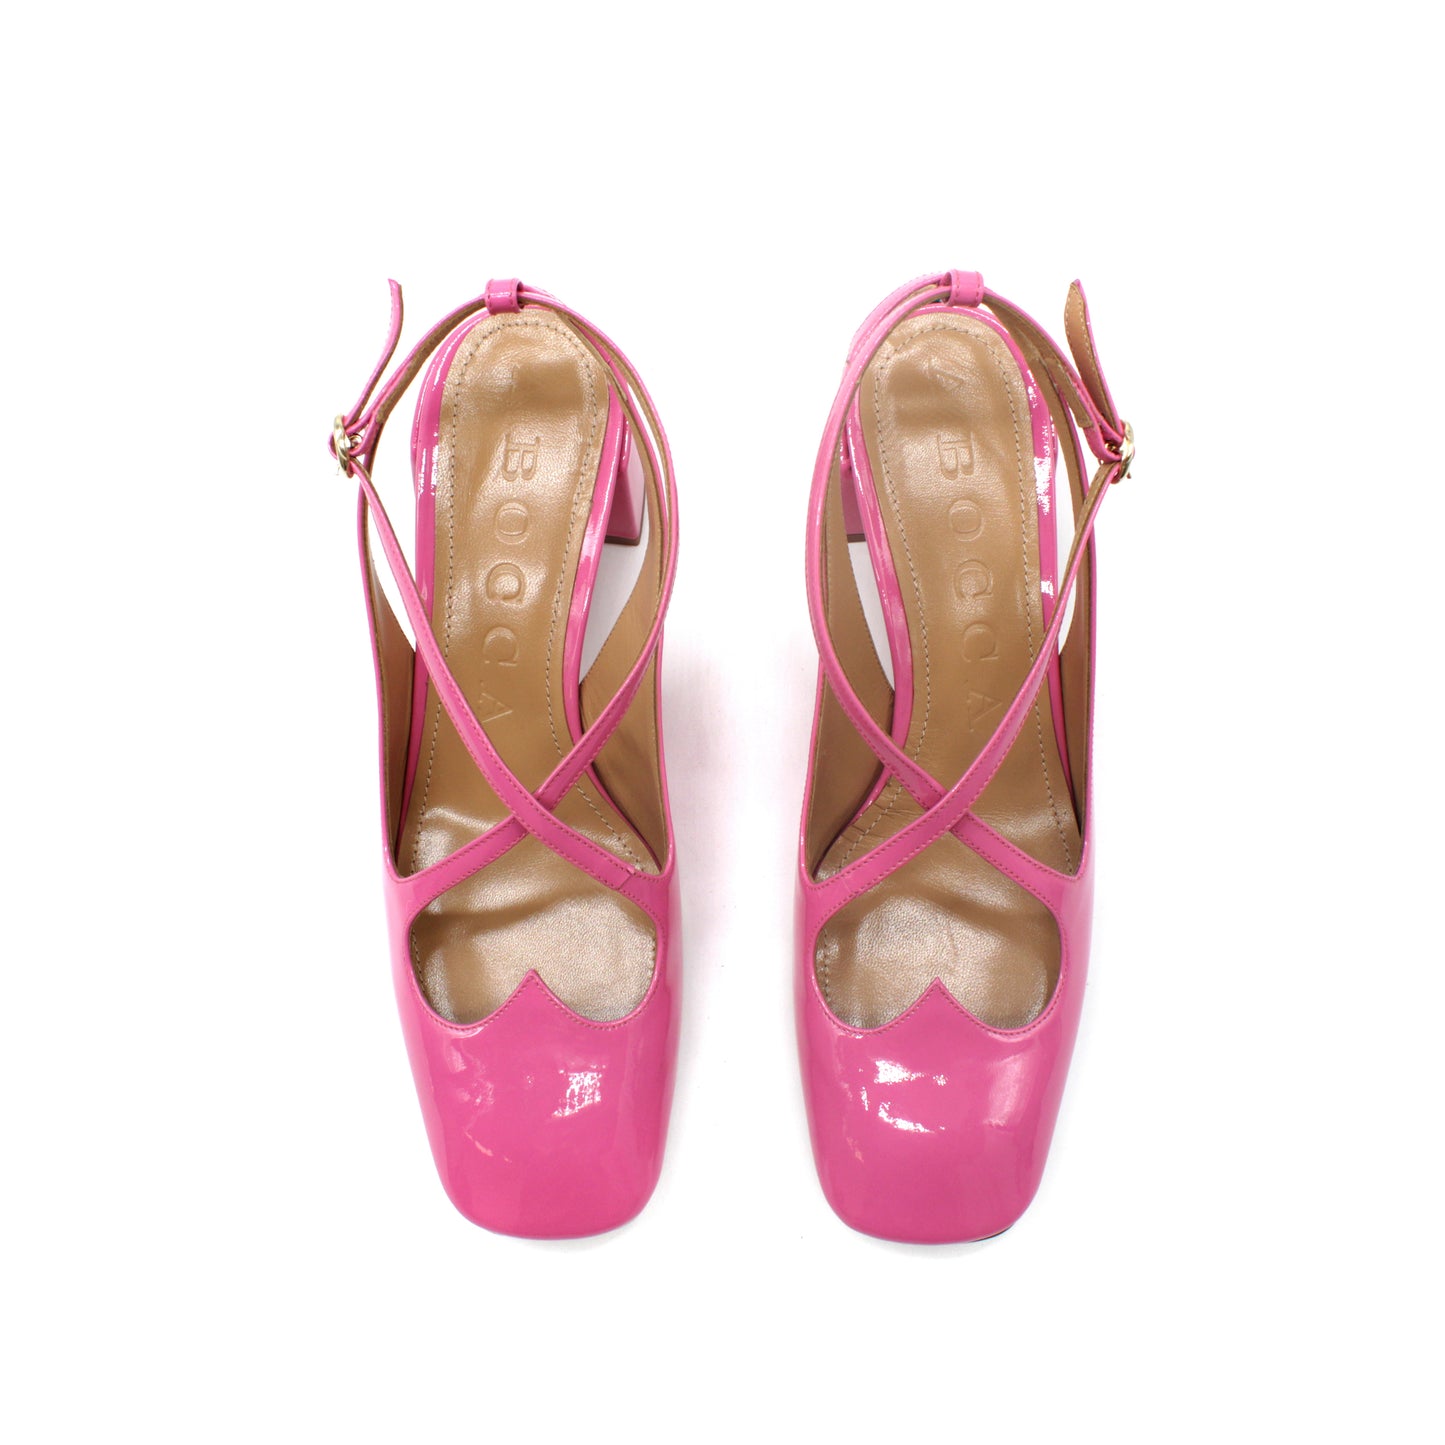 Sling Back Two for Love in vernice bubblegum - Second life